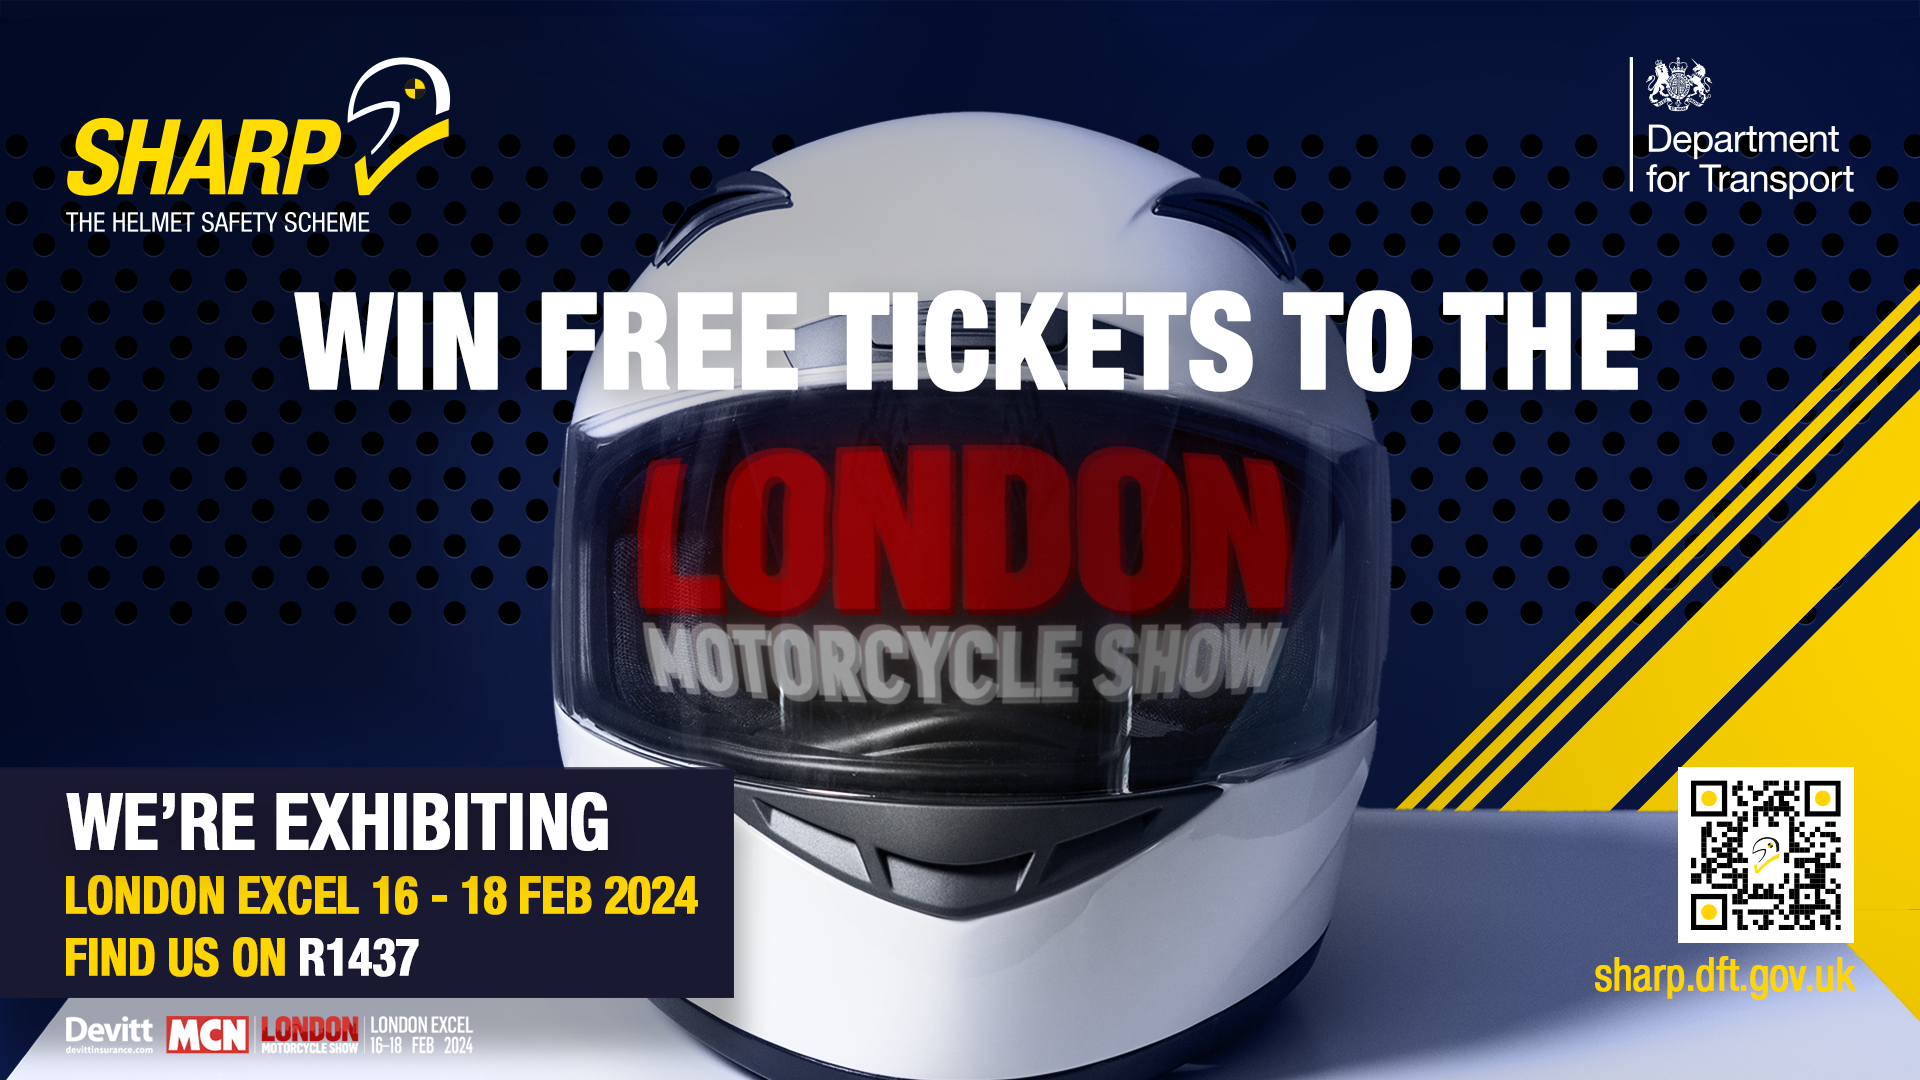 Win Free Tickets to the London Motocycle Show